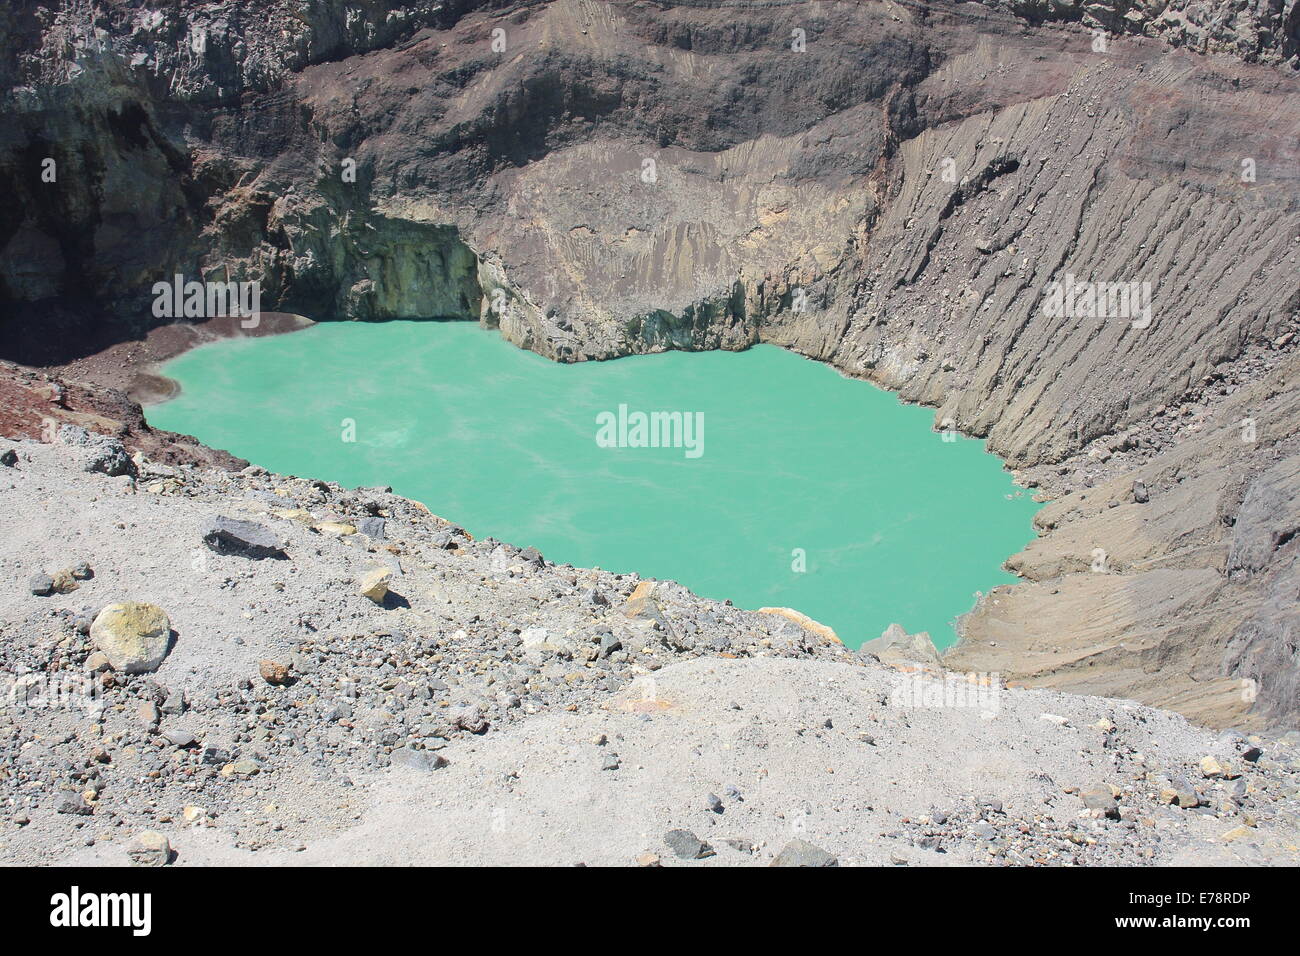 The blue-green lake in the crater of Santa Ana (Ilamatepec) volcano, El Salvador, bubbles slowly due to the geothermal heat. Stock Photo